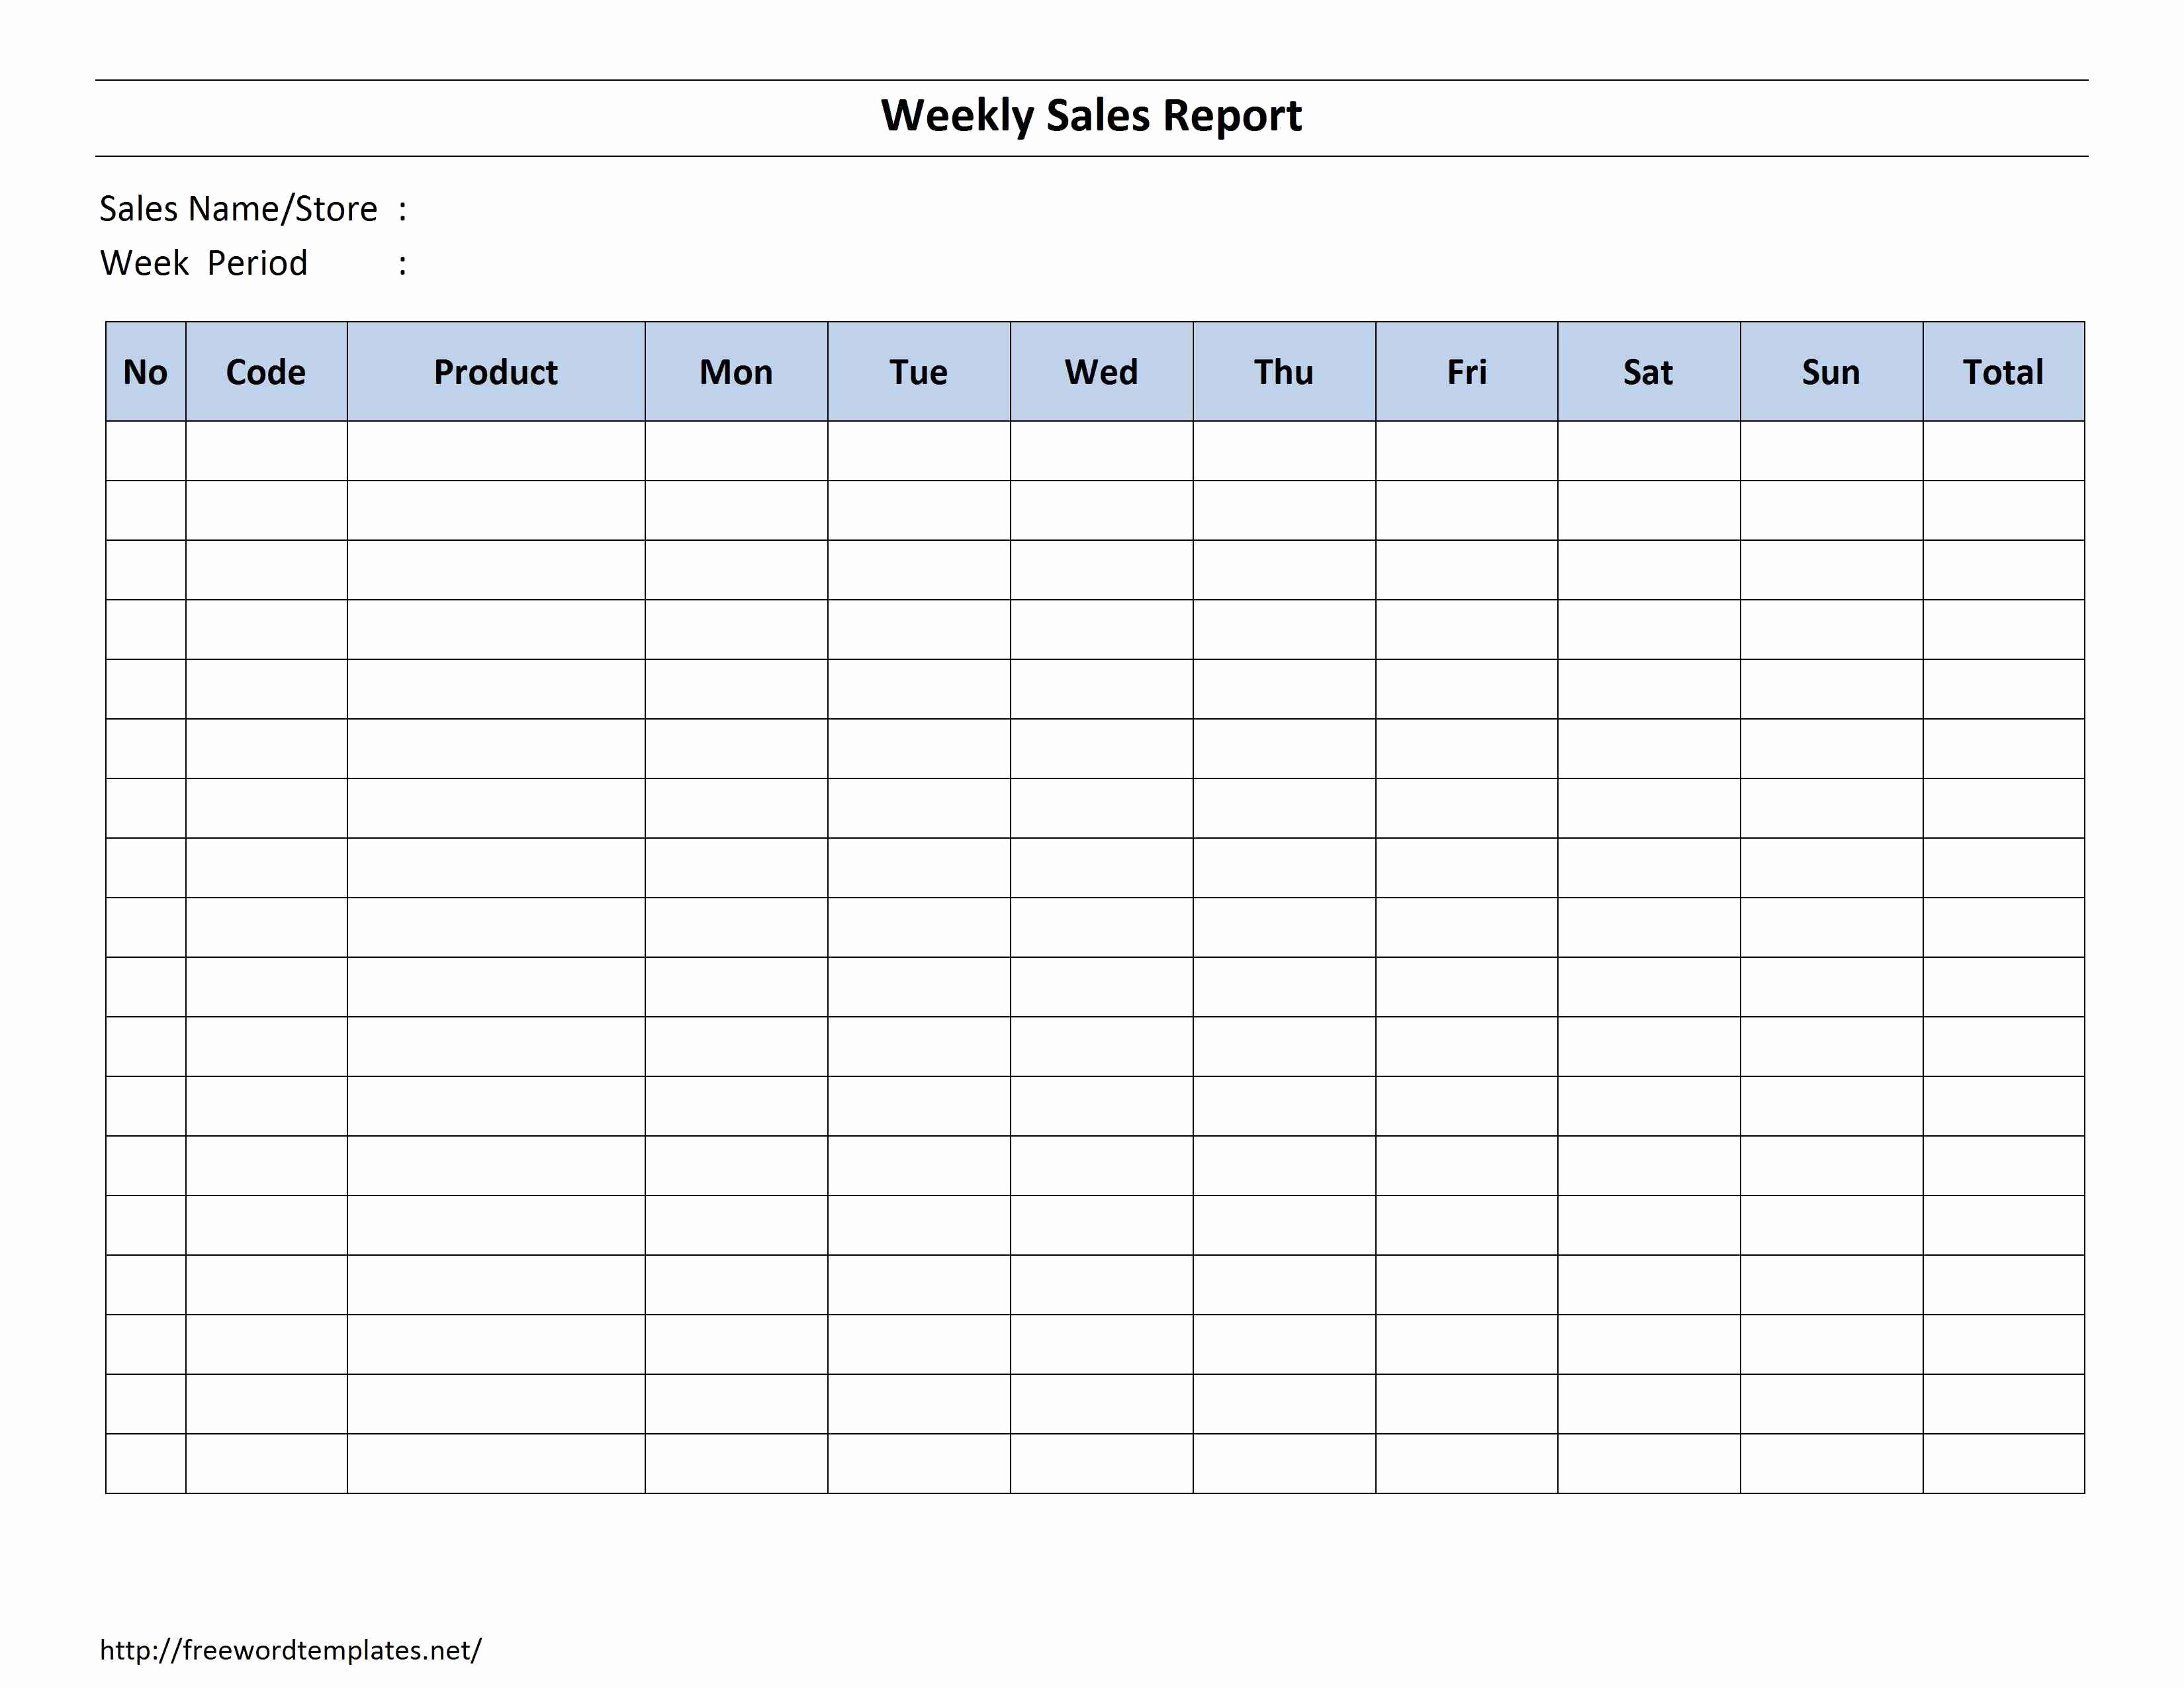 Weekly Sales Report Template Lovely Weekly Sales Report